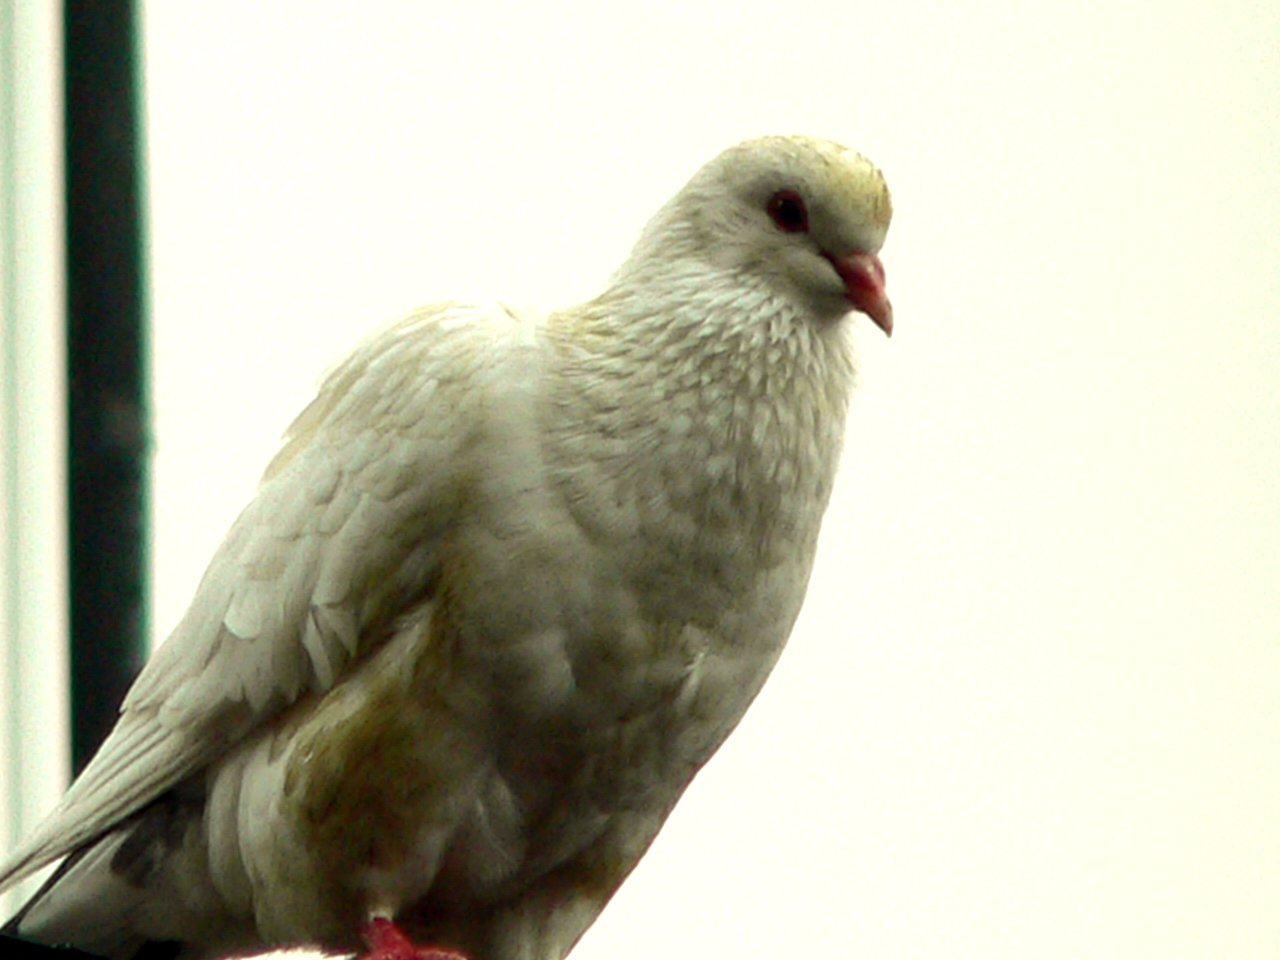 a white bird with a red beak sitting on a perch